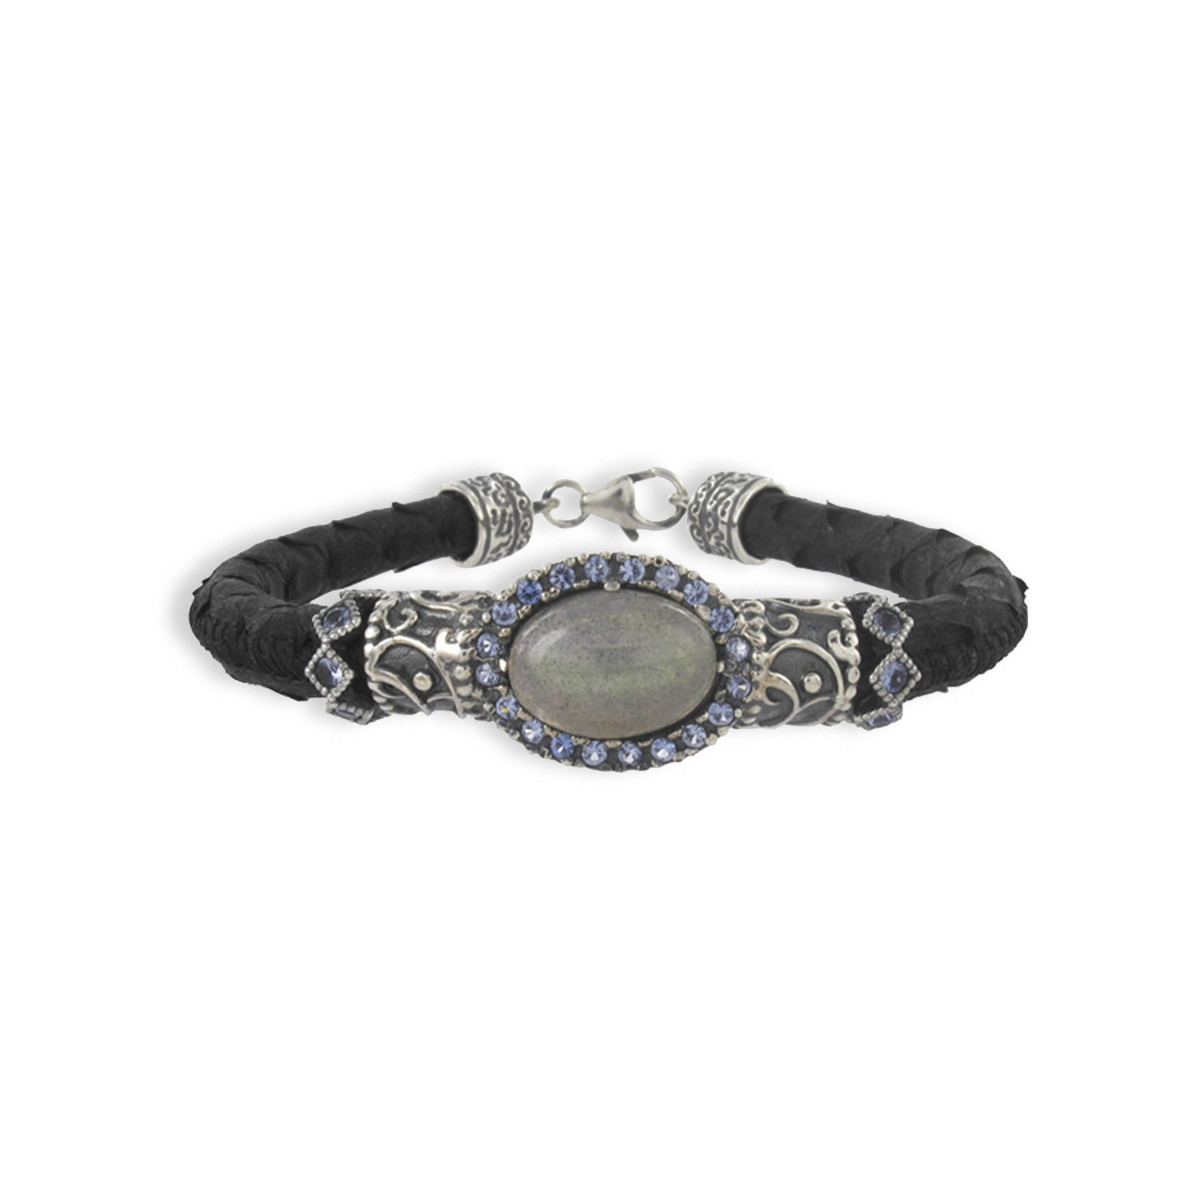 SILVER AND LEATHER BRACELET WITH NATURAL STONES